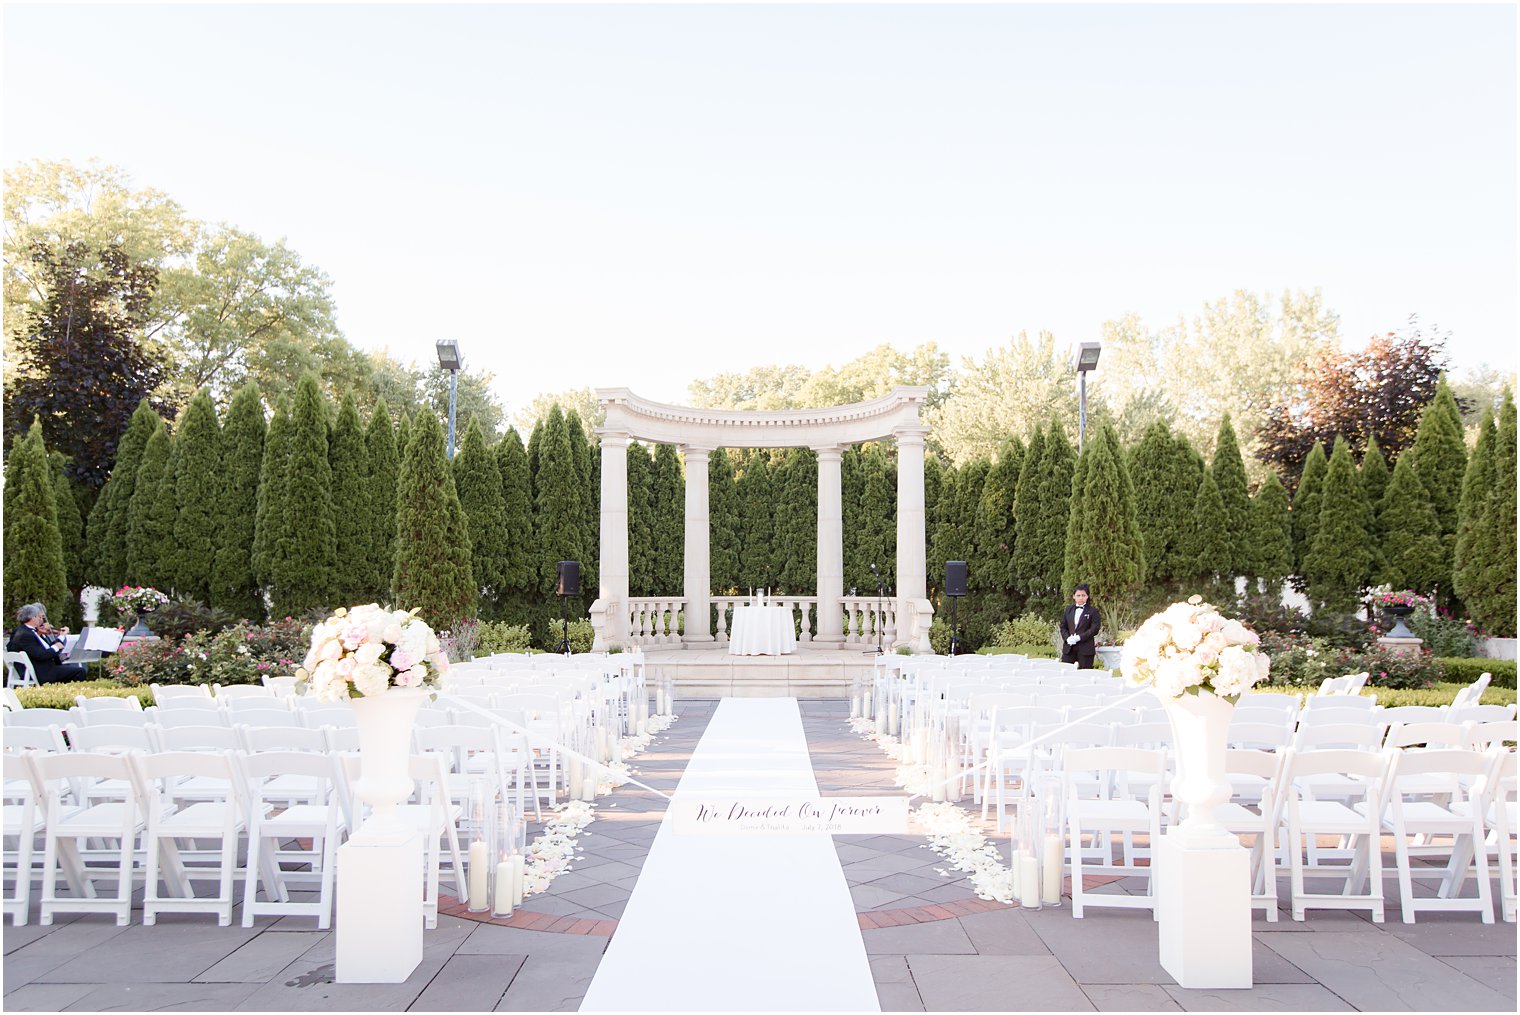 Outdoor ceremony at The Rockleigh in Rockleigh, NJ